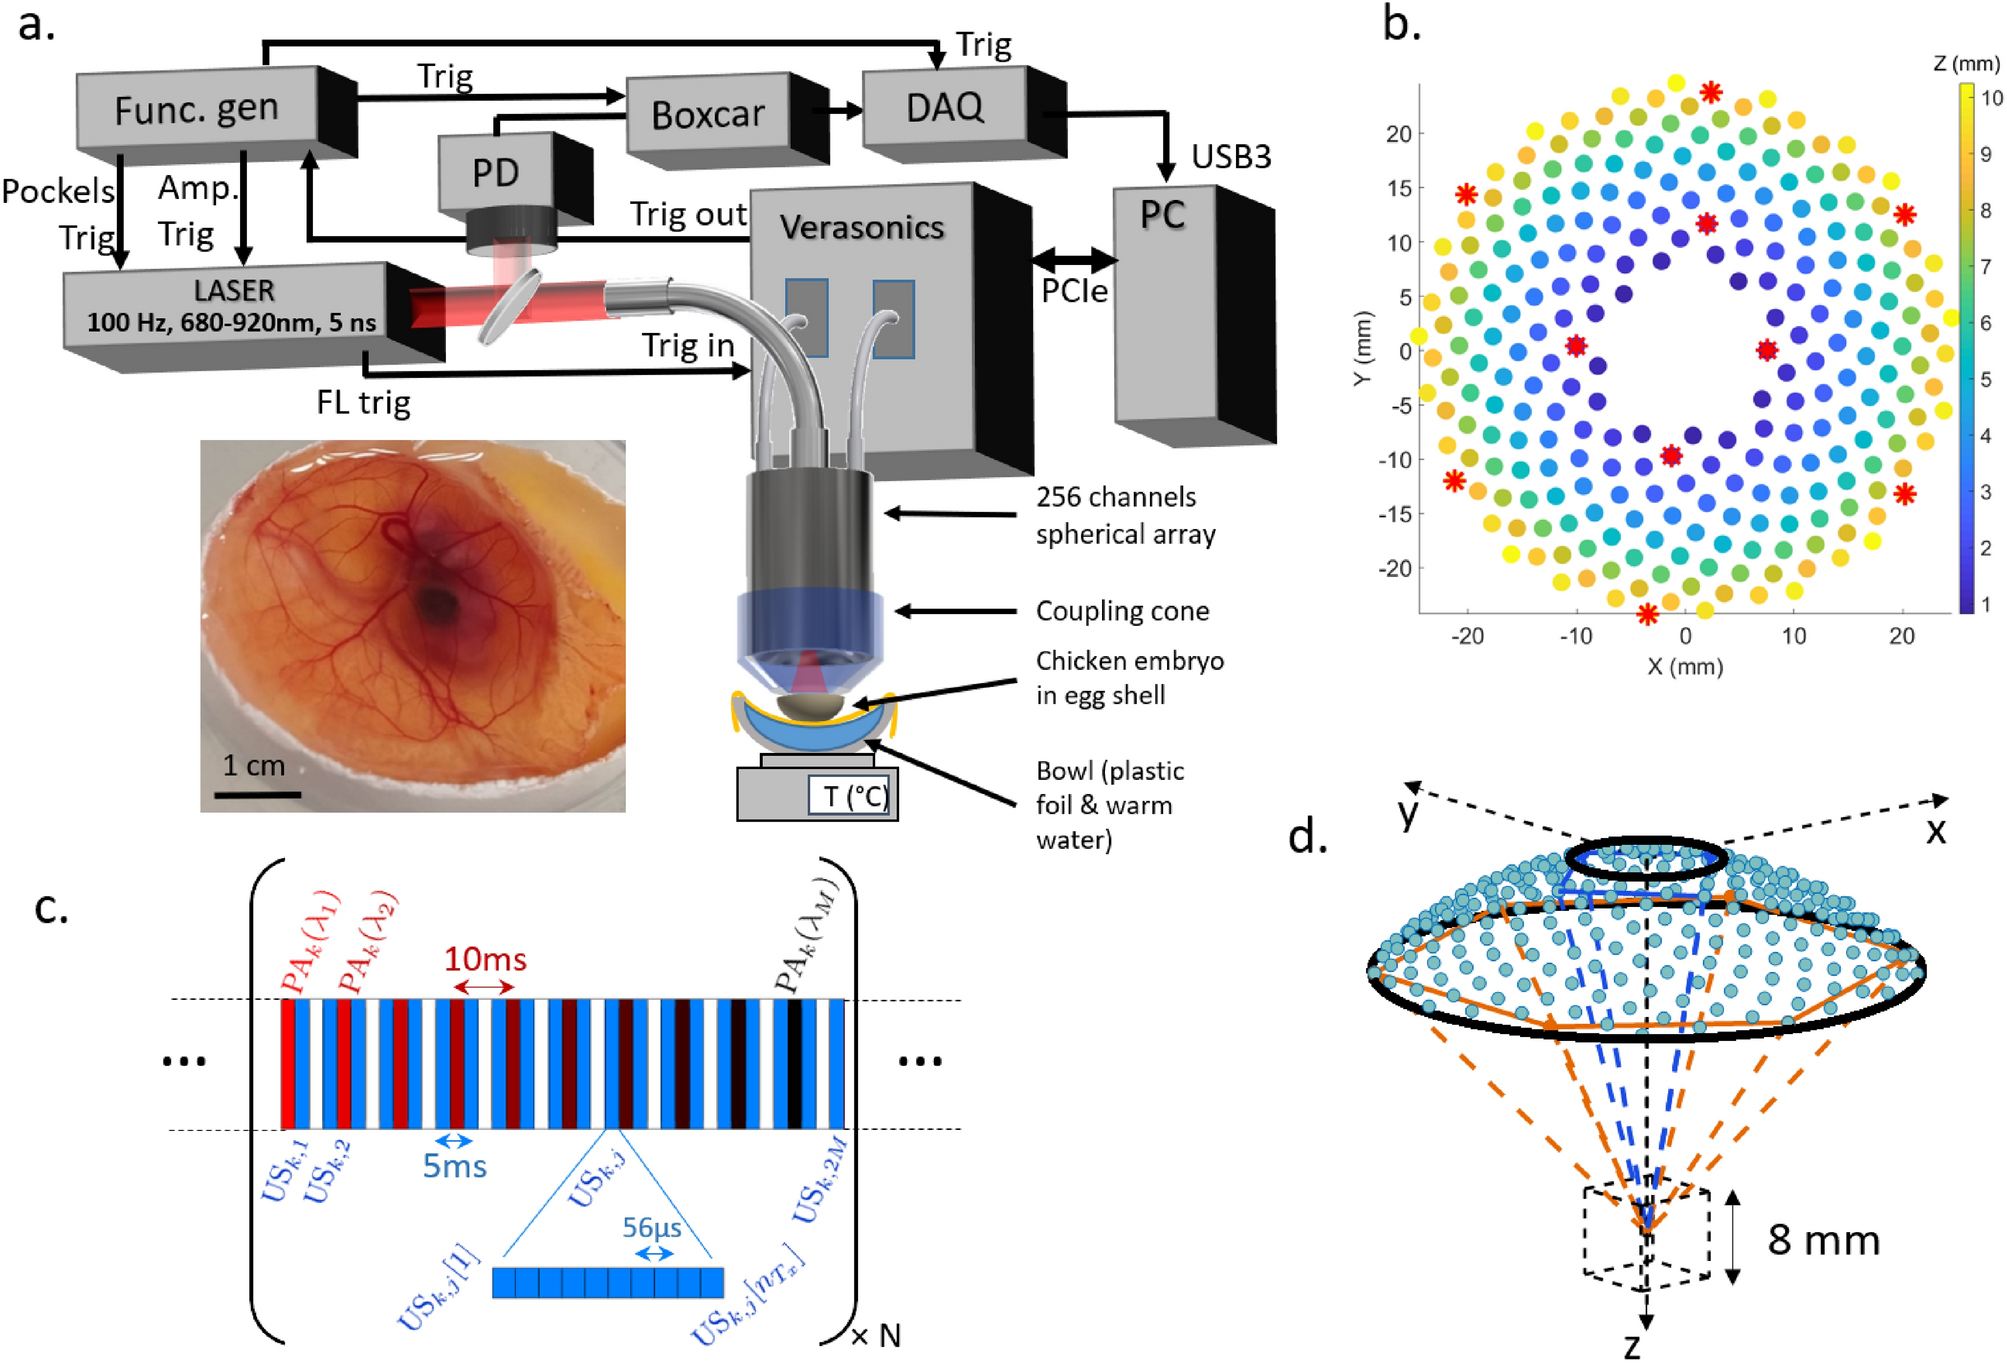 Full-visibility 3D imaging of oxygenation and blood flow by simultaneous  multispectral photoacoustic fluctuation imaging (MS-PAFI) and ultrasound  Doppler | Scientific Reports